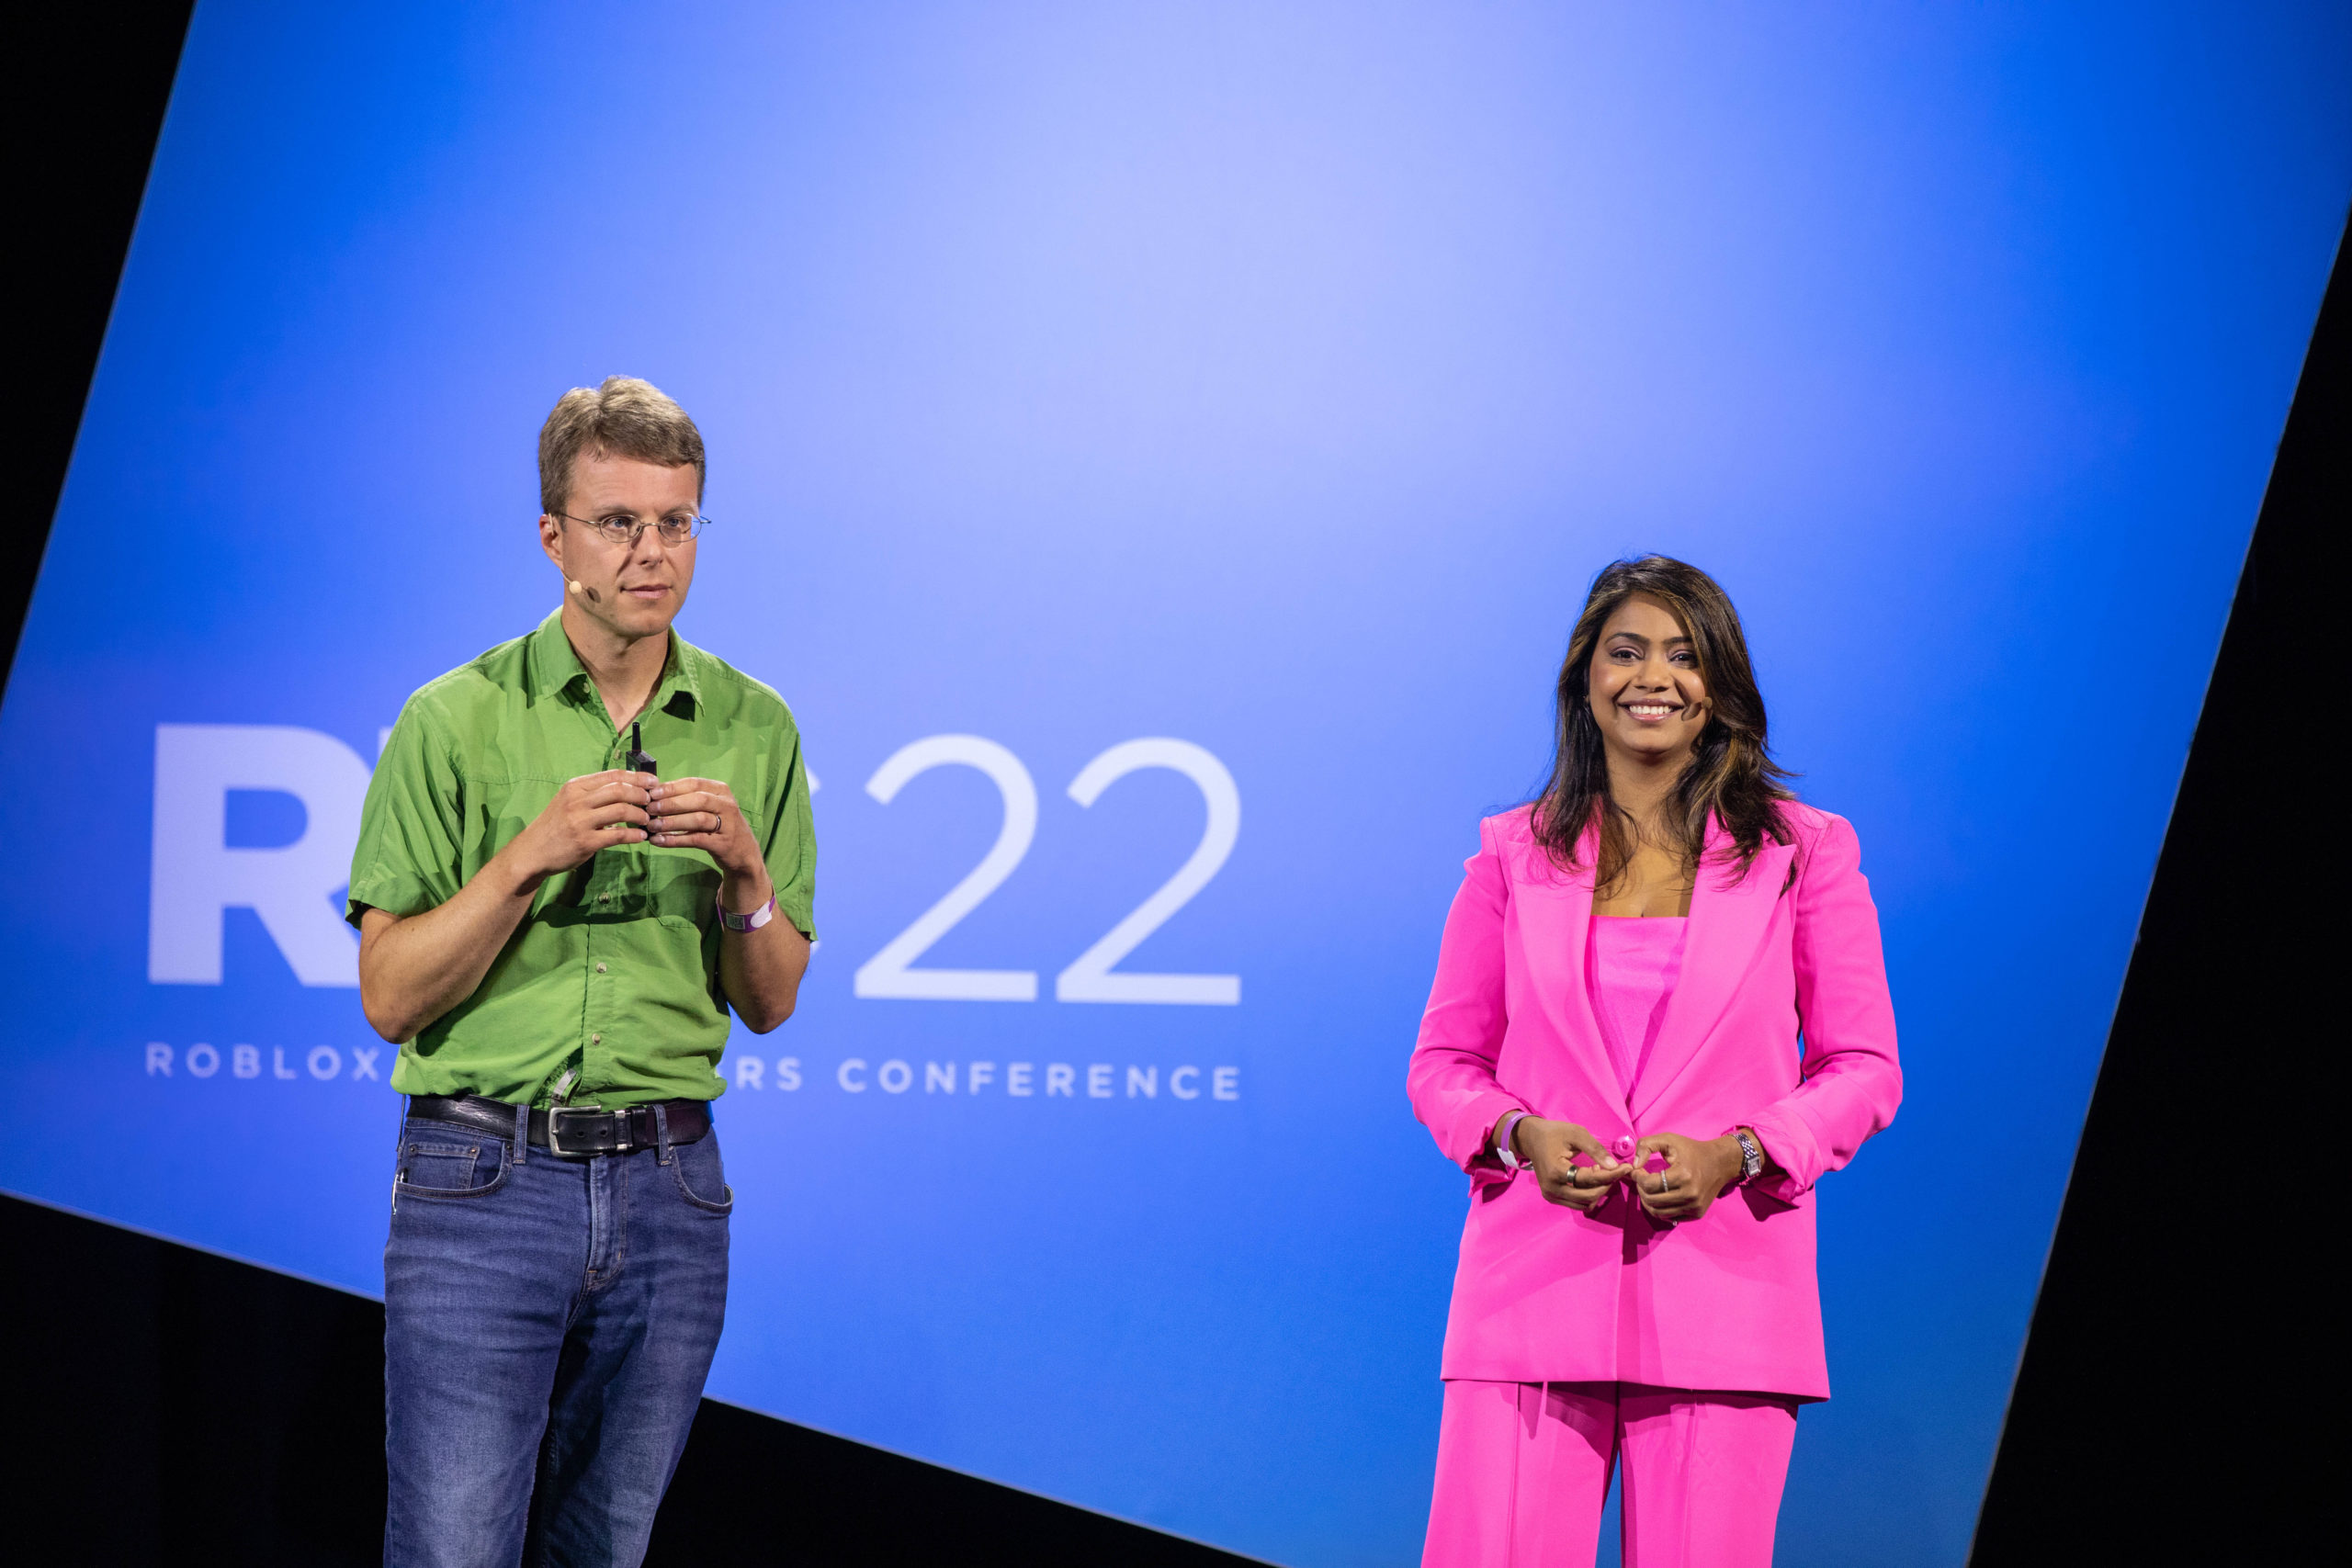 Garima Sinha and her colleague Tom Sanocki on stage at Roblox Developers Conference